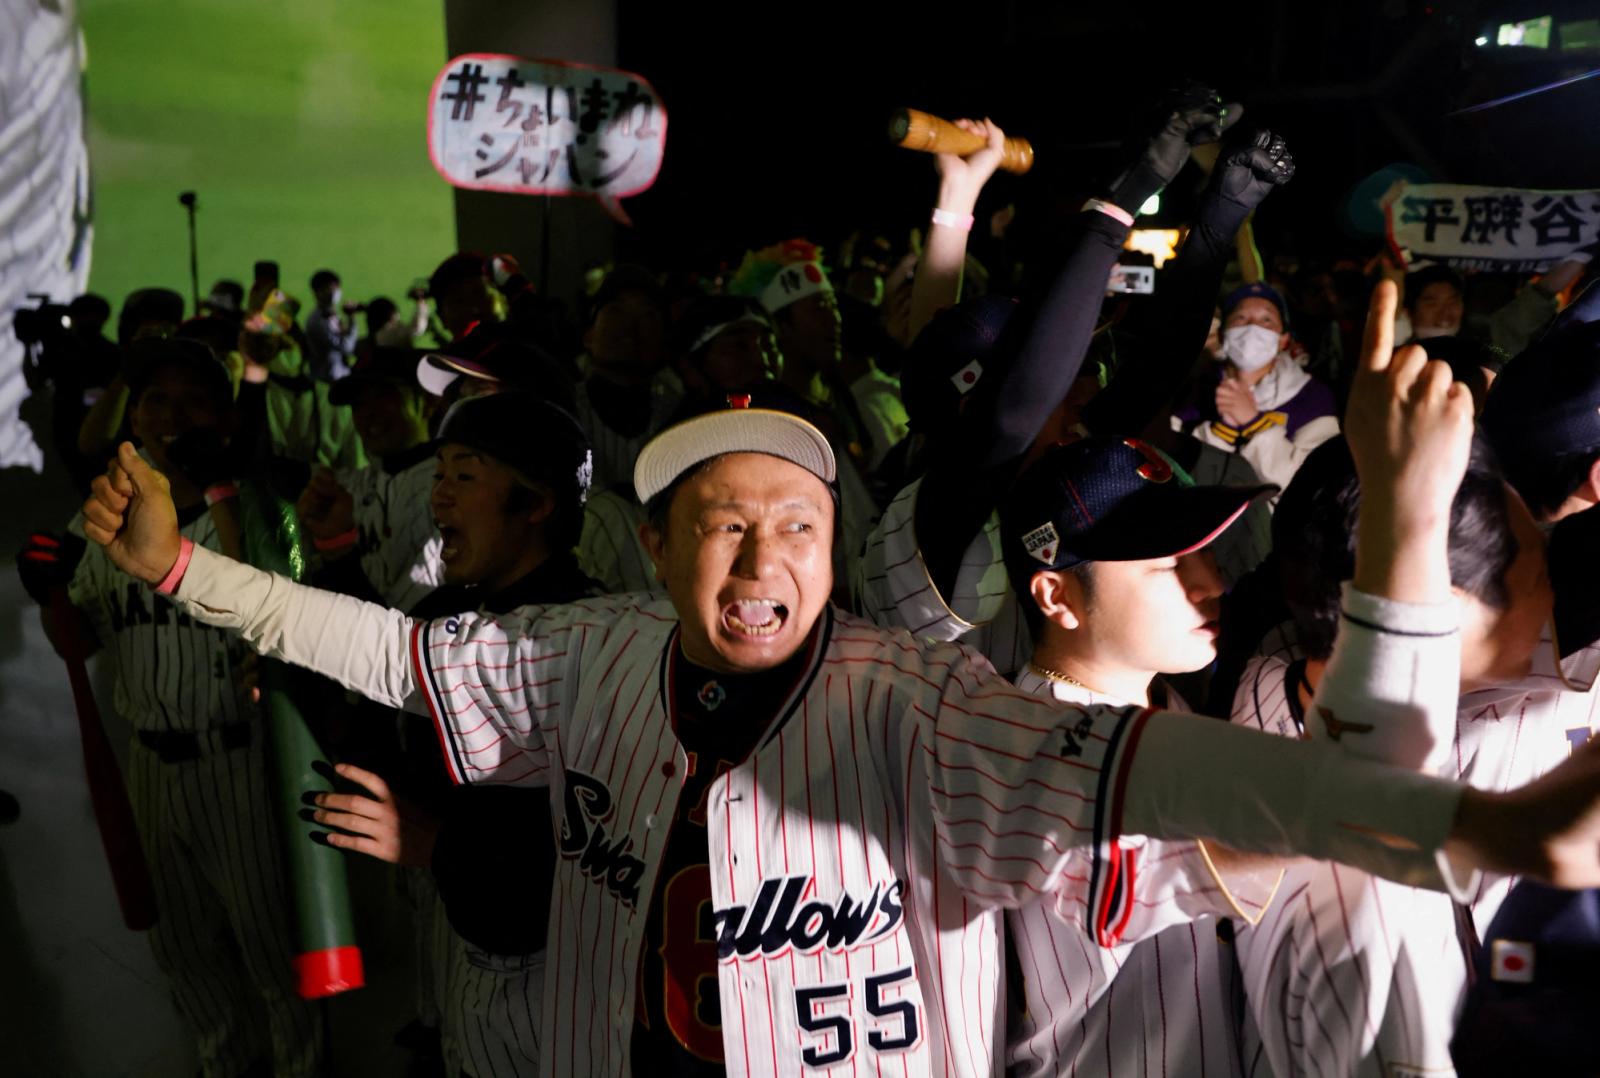 Fans react after Japan won the World Baseball Classic final game against the United States, in Tokyo, Japan March 22, 2023. REUTERS/Issei Kato